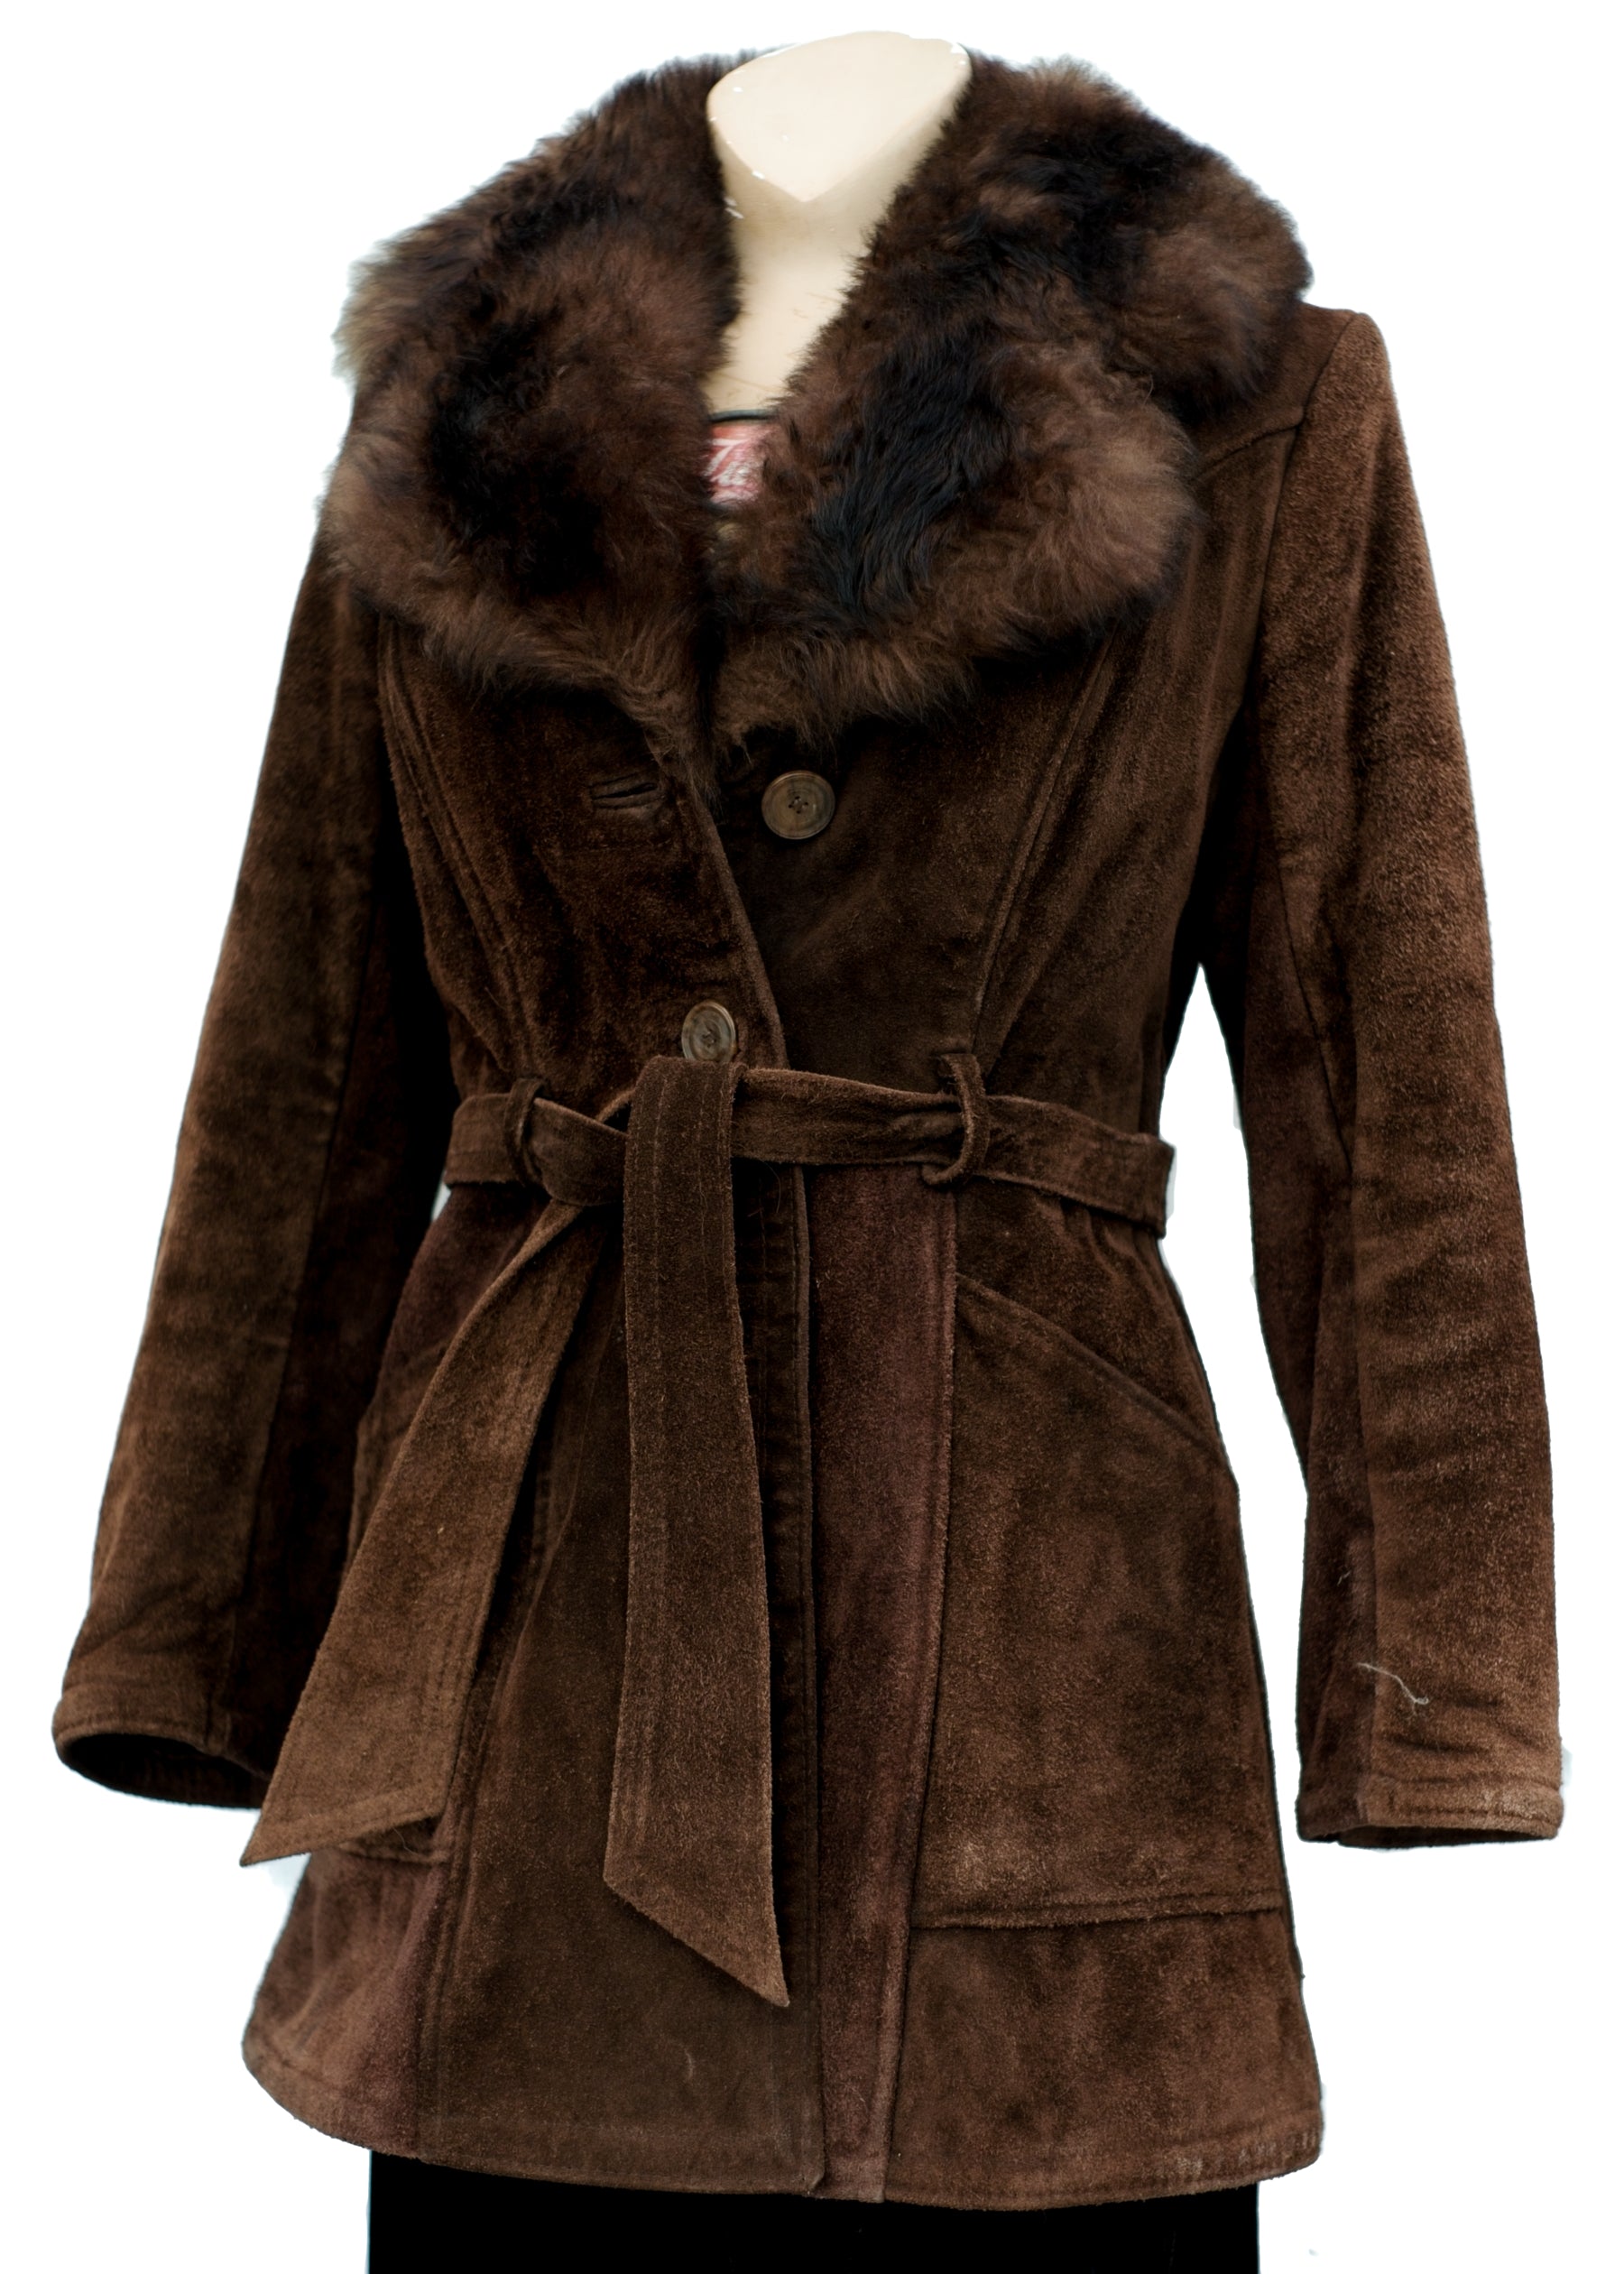 vintage 70s brown leather suede penny lane coat with faux fur collar and acrylic faux sheepskin lining, very heavy winter coat